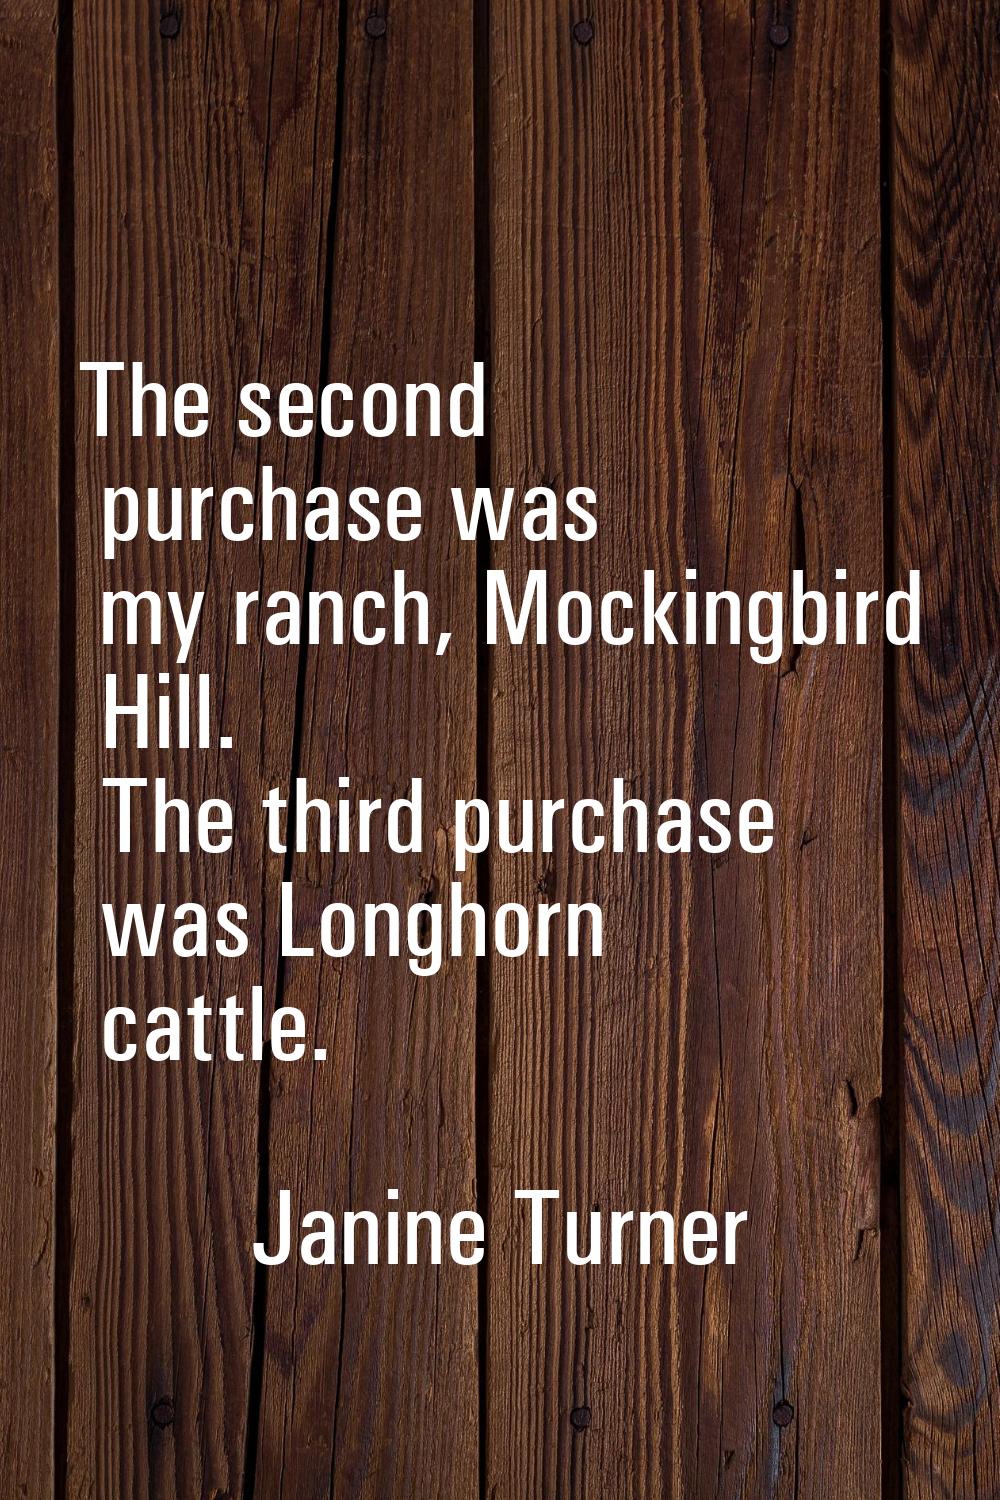 The second purchase was my ranch, Mockingbird Hill. The third purchase was Longhorn cattle.